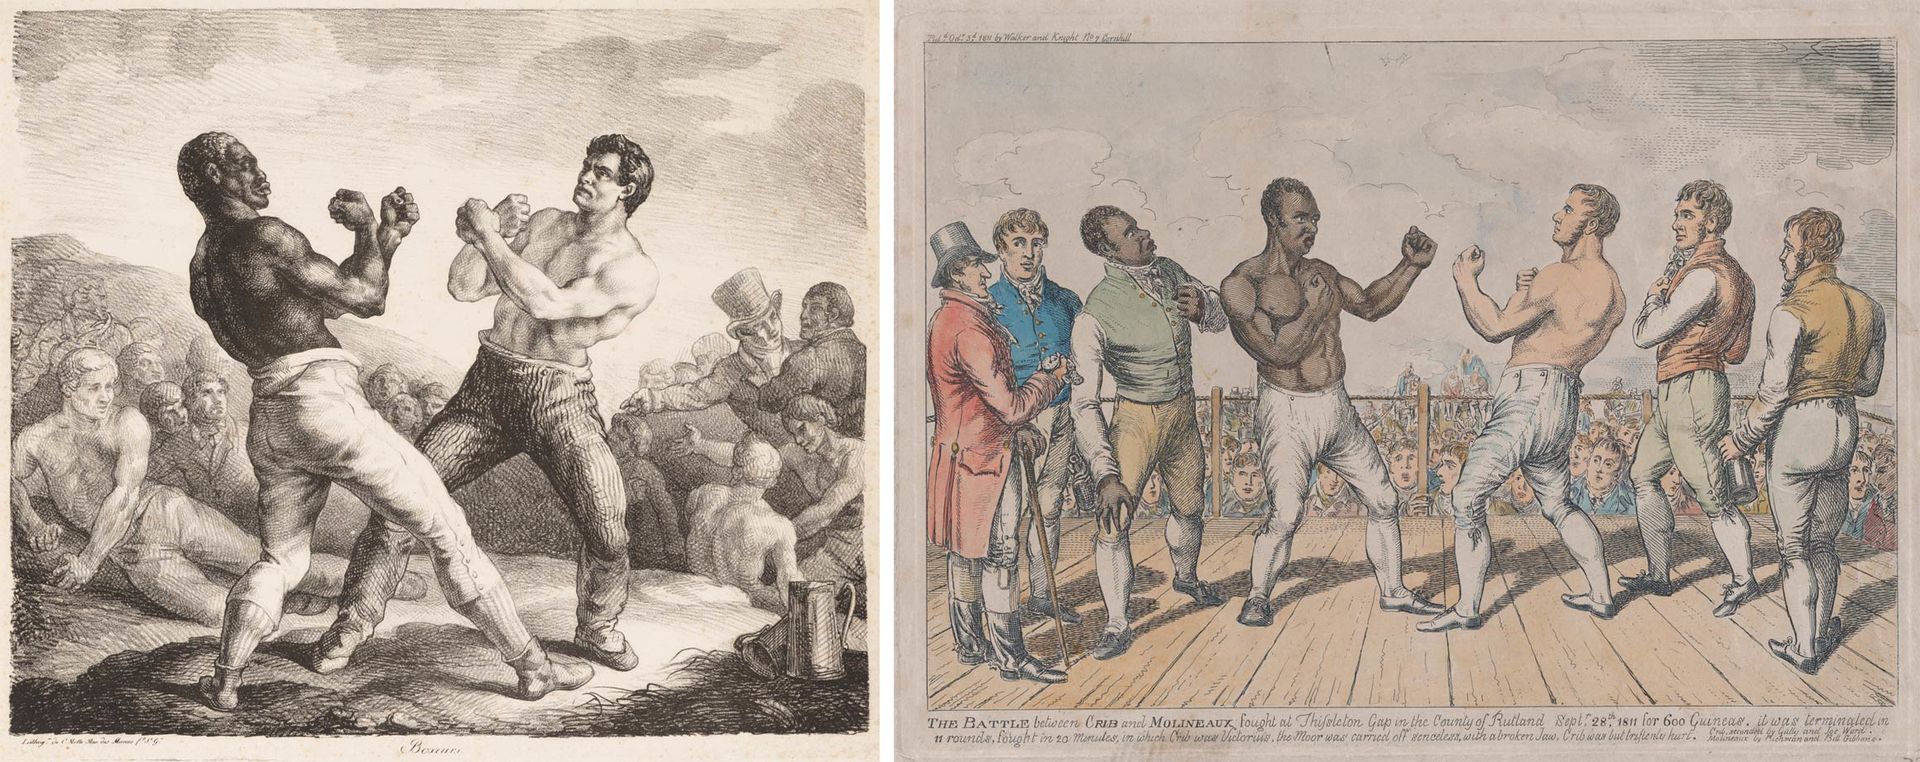 At left, a lithograph by Théodore Géricault from 1818 depicting two men boxing in front of a small group of onlookers; at right, an etching from 1811 depicting a boxing battle held on a pier